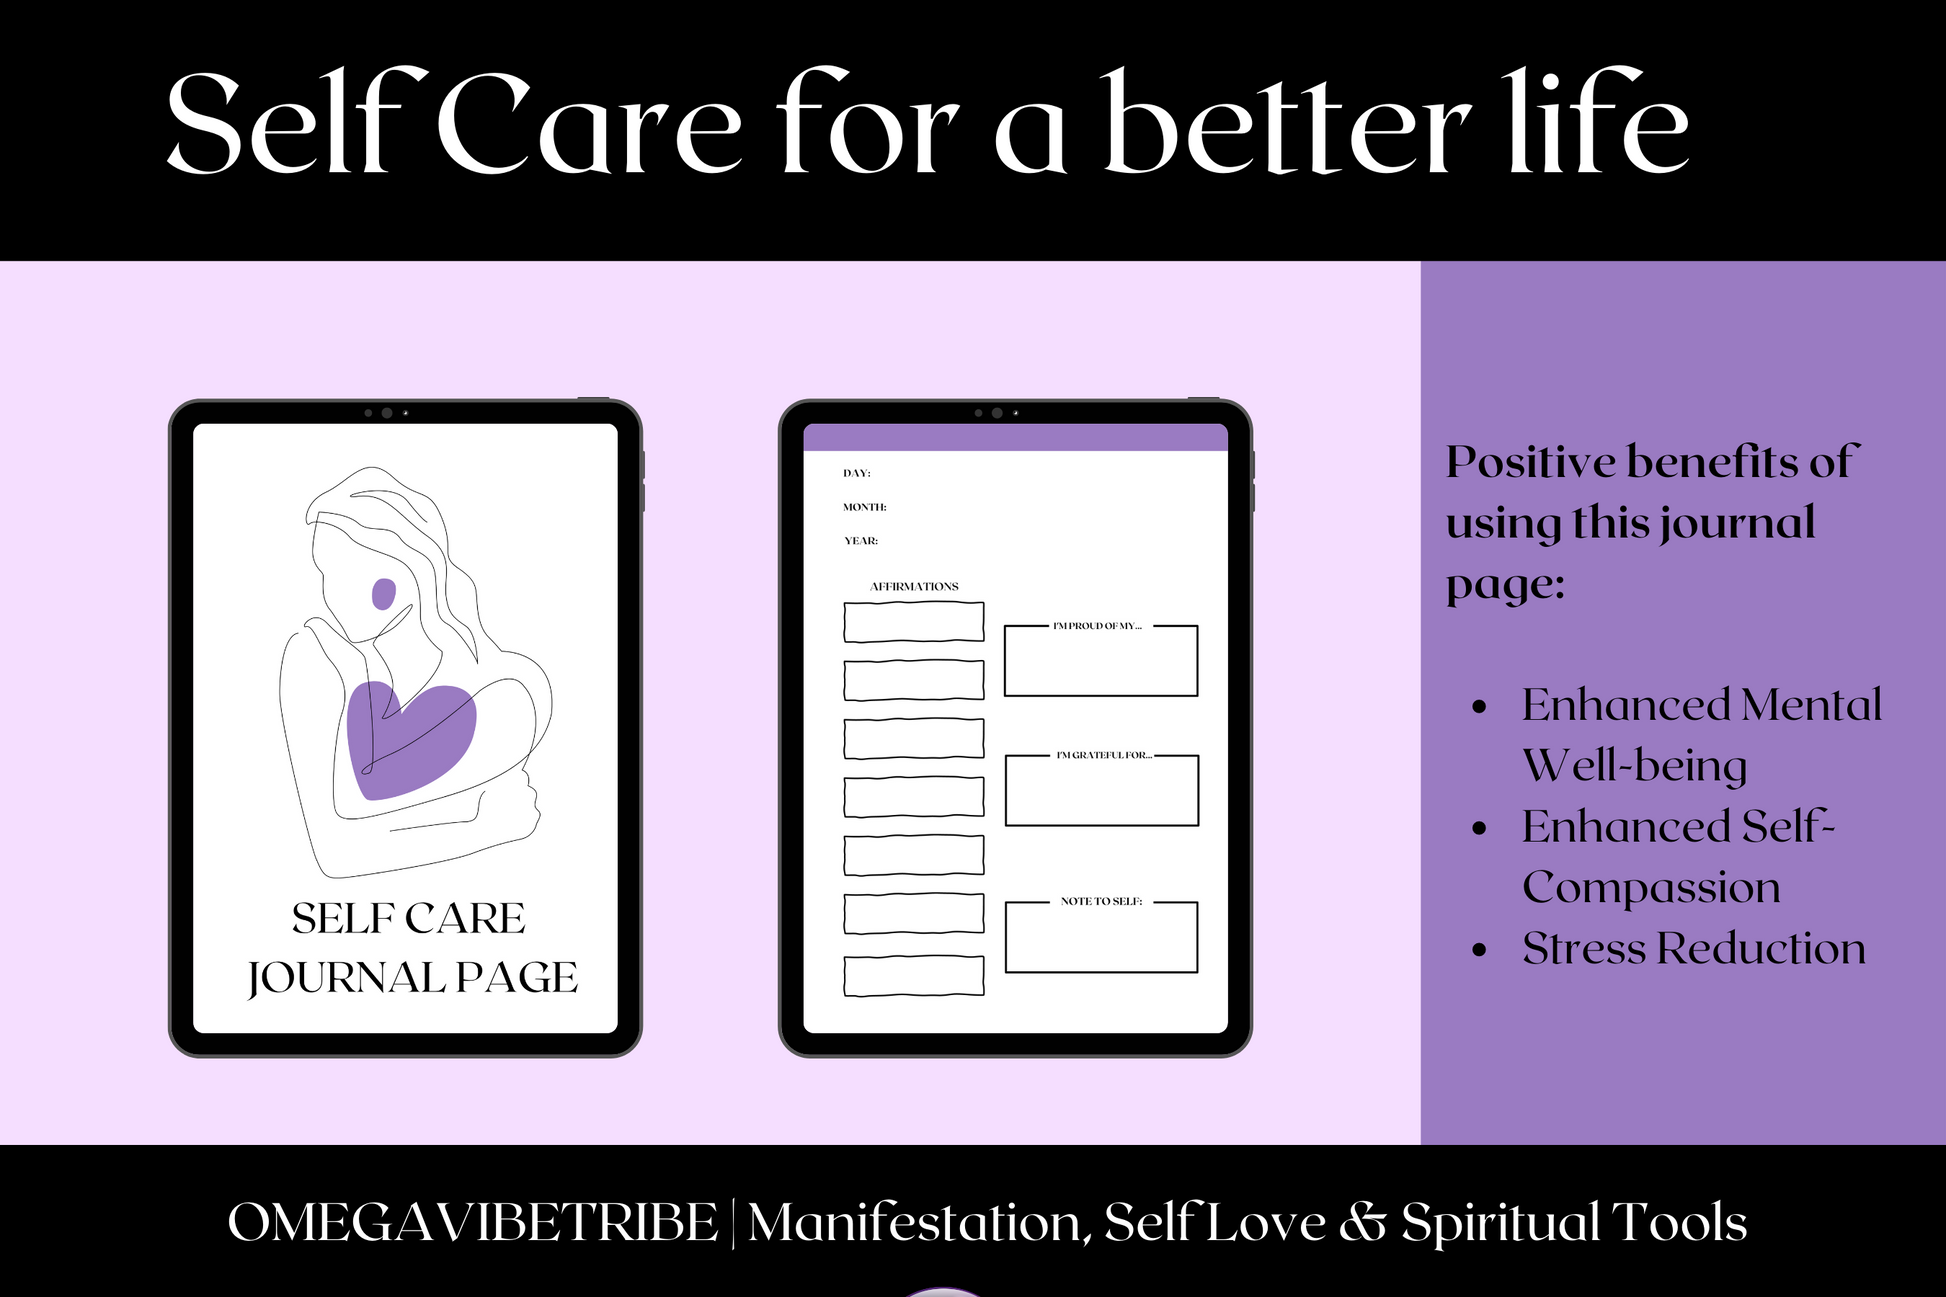 self care for a better life - this is what this photo shows and also the benefits of using this journal page.